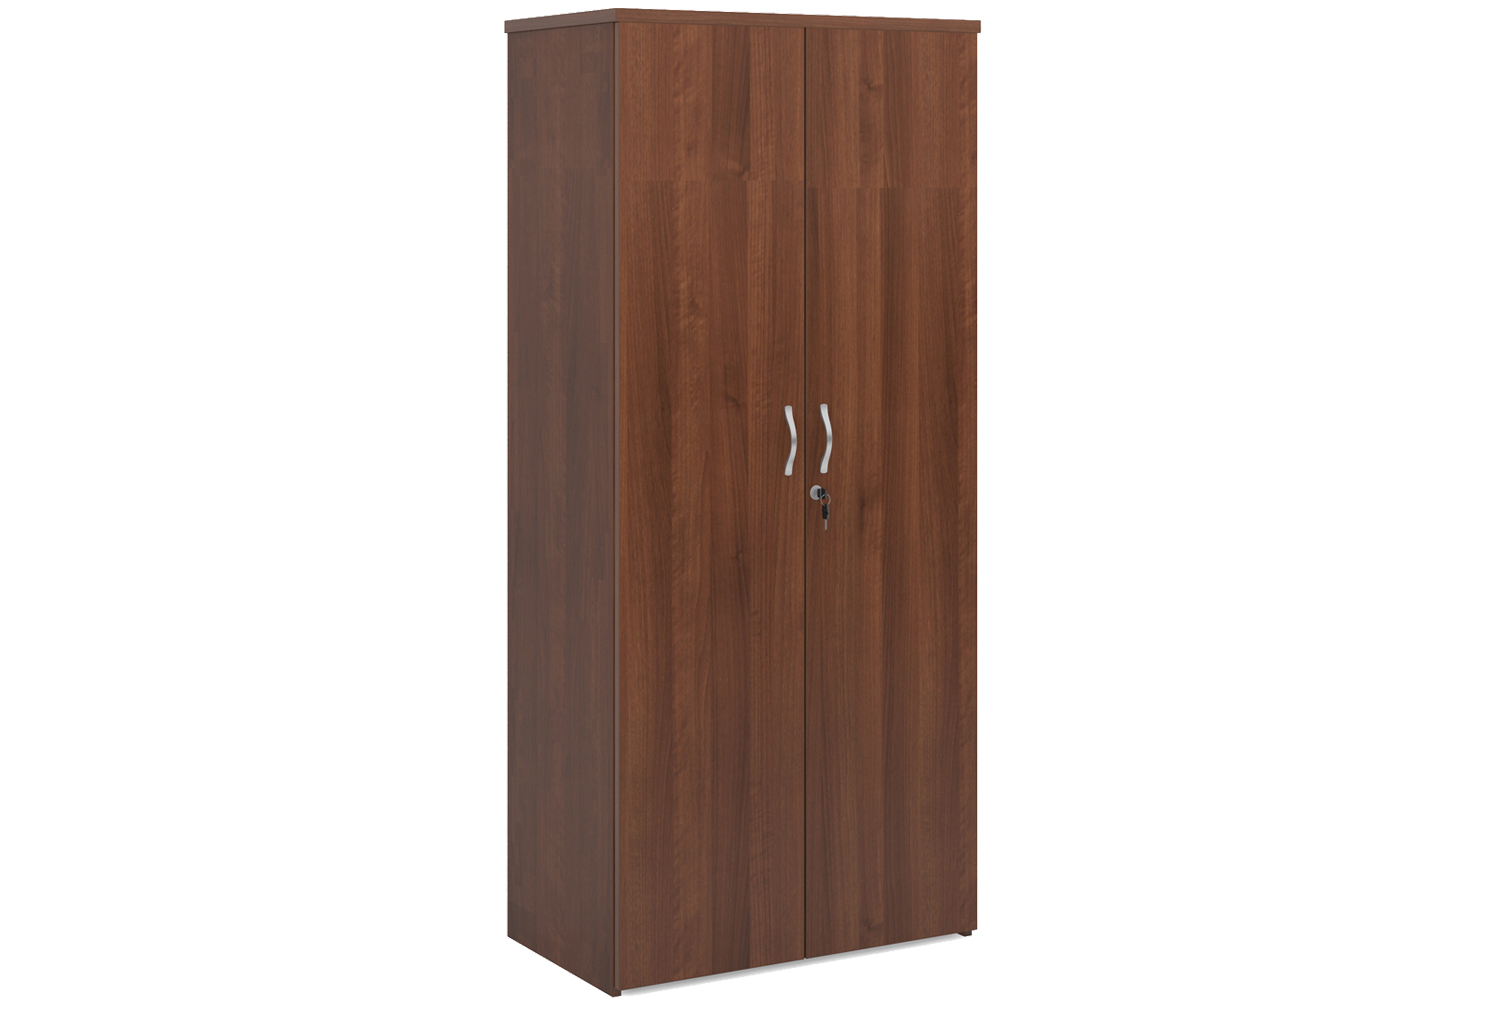 Thrifty Next-Day Double Door Cupboards Walnut, 4 Shelf - 80wx47dx179h (cm), Express Delivery